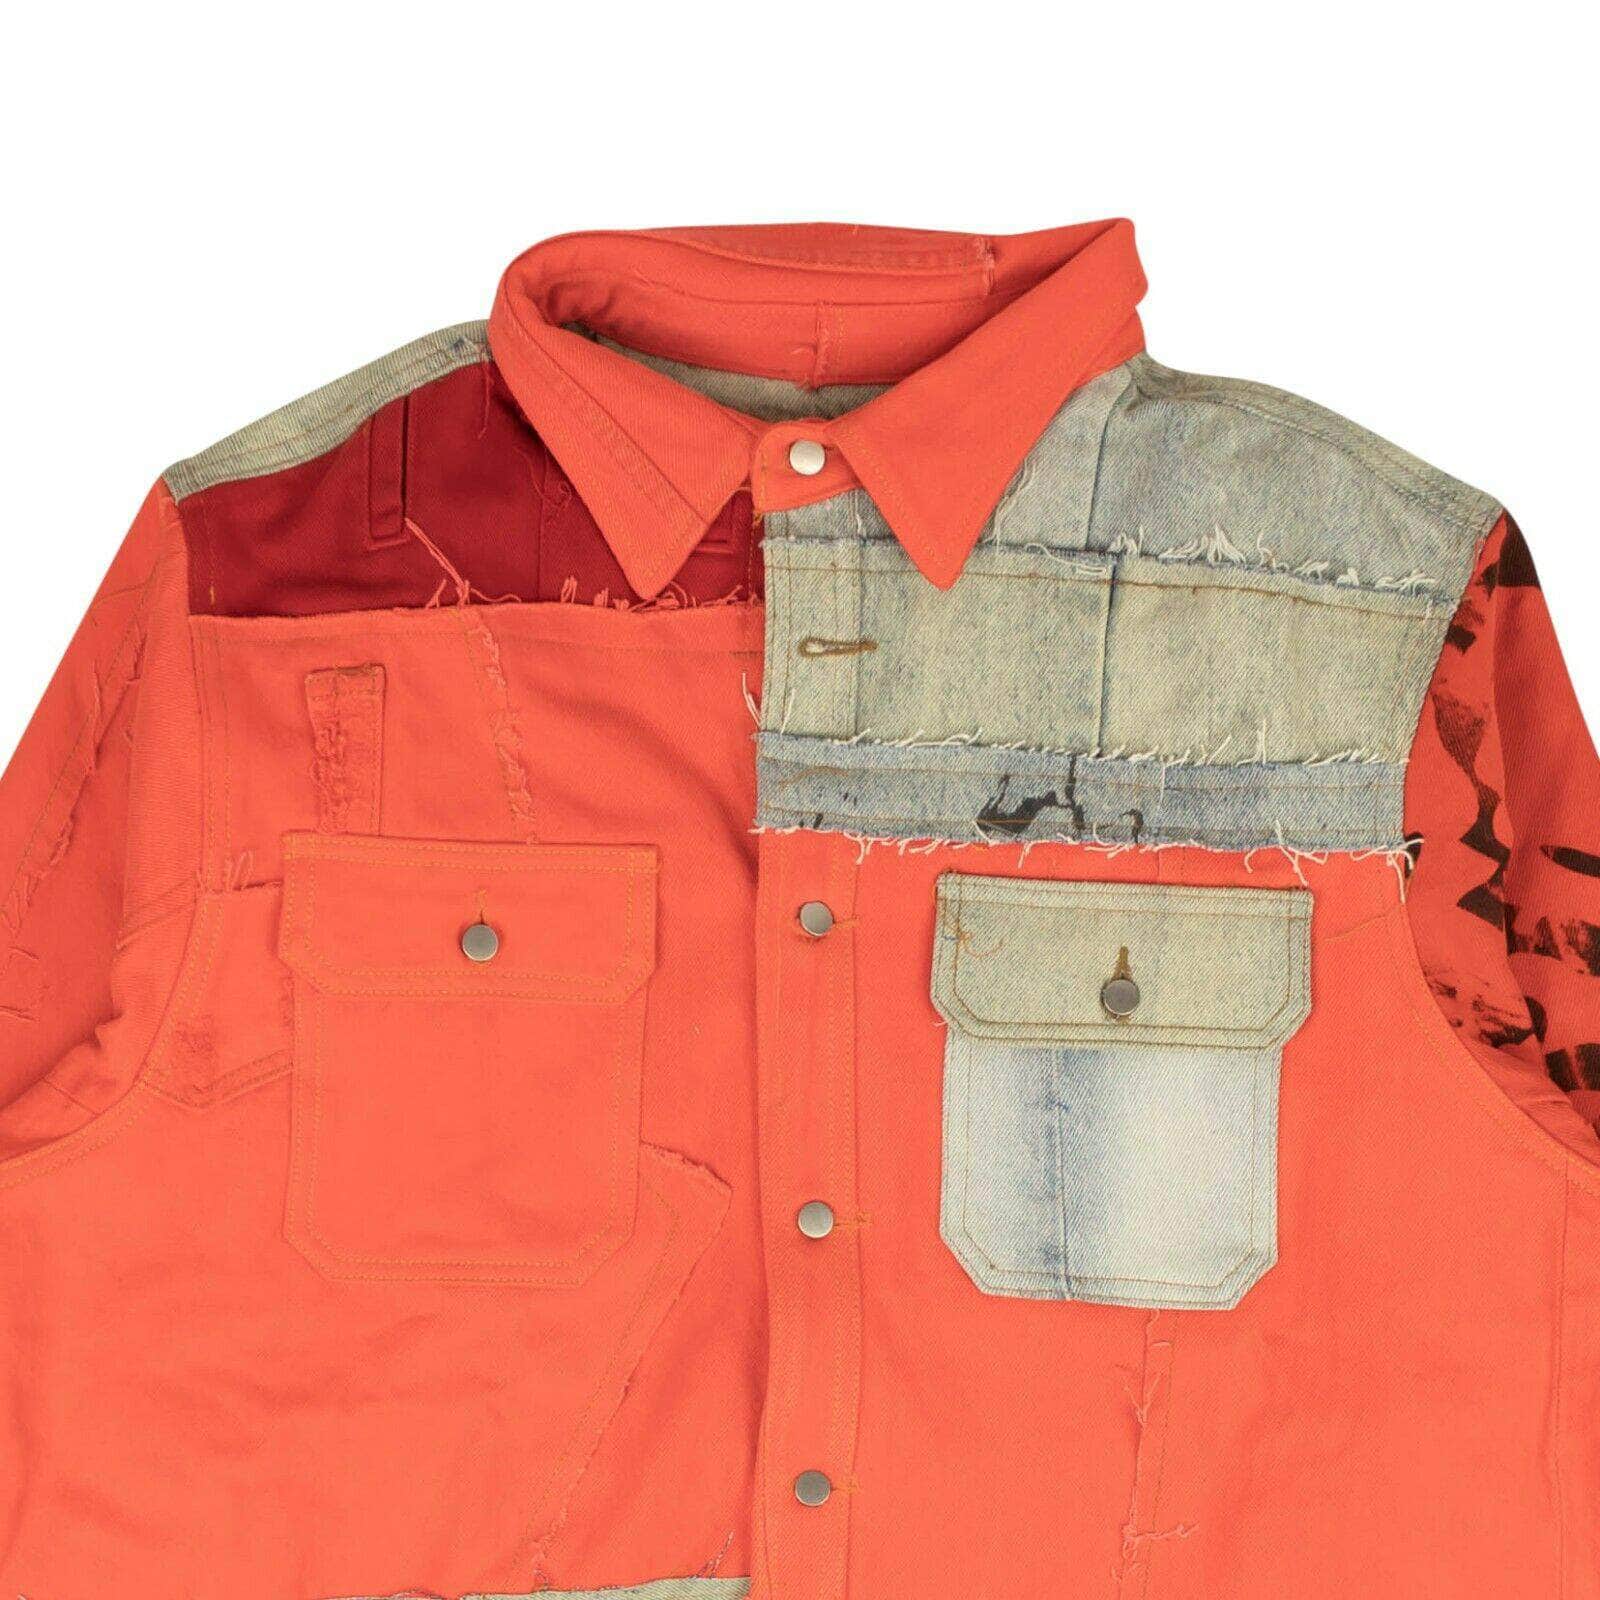 424 ON FAIRFAX 250-500, 424-on-fairfax, channelenable-all, chicmi, couponcollection, gender-mens, main-clothing, mens-shoes, size-l, size-m, size-s, size-xl Orange And Blue Reworked Work Button Down Shirt